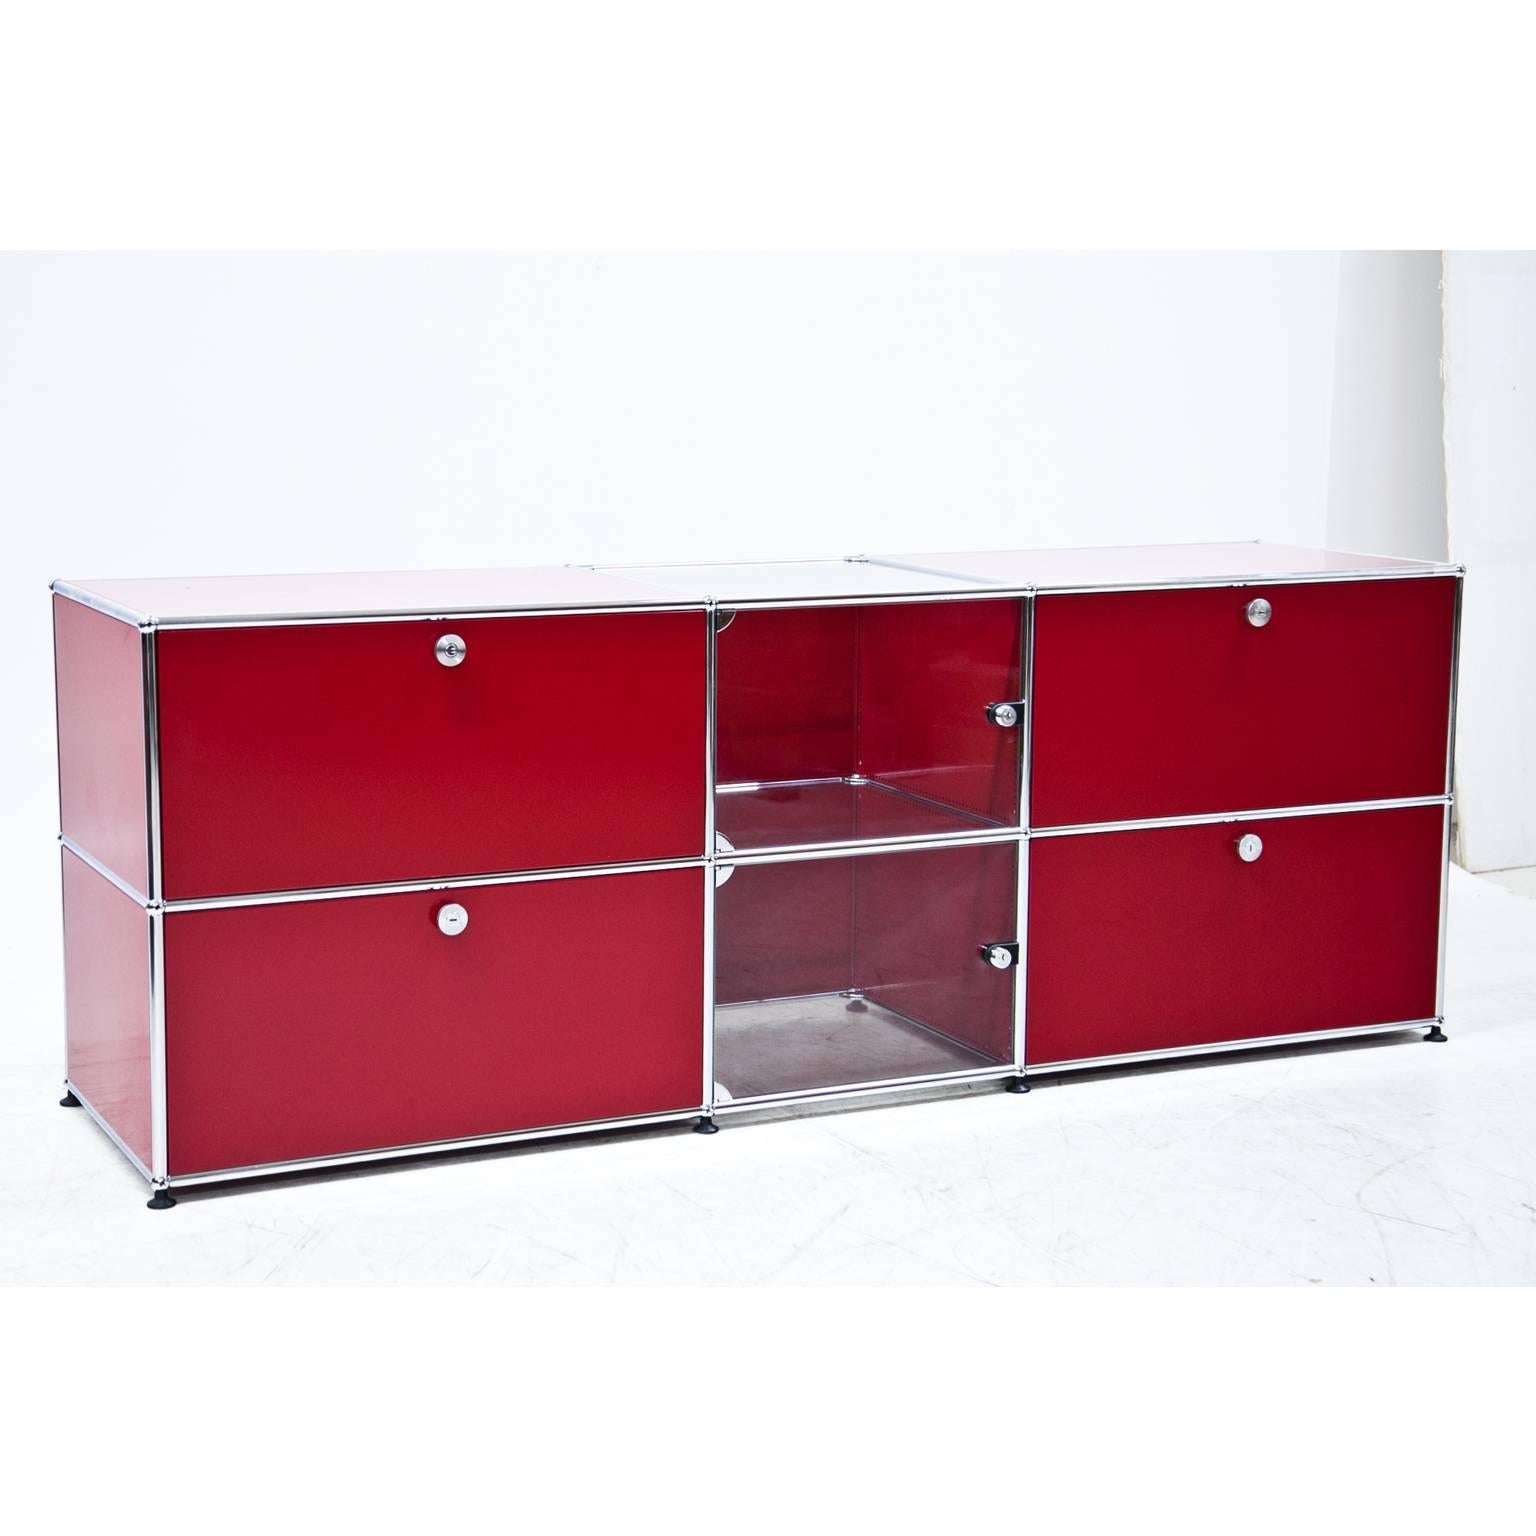 Red Usm Haller sideboard with two compartments for files, two-fold-down compartments and a display case element in the centre.